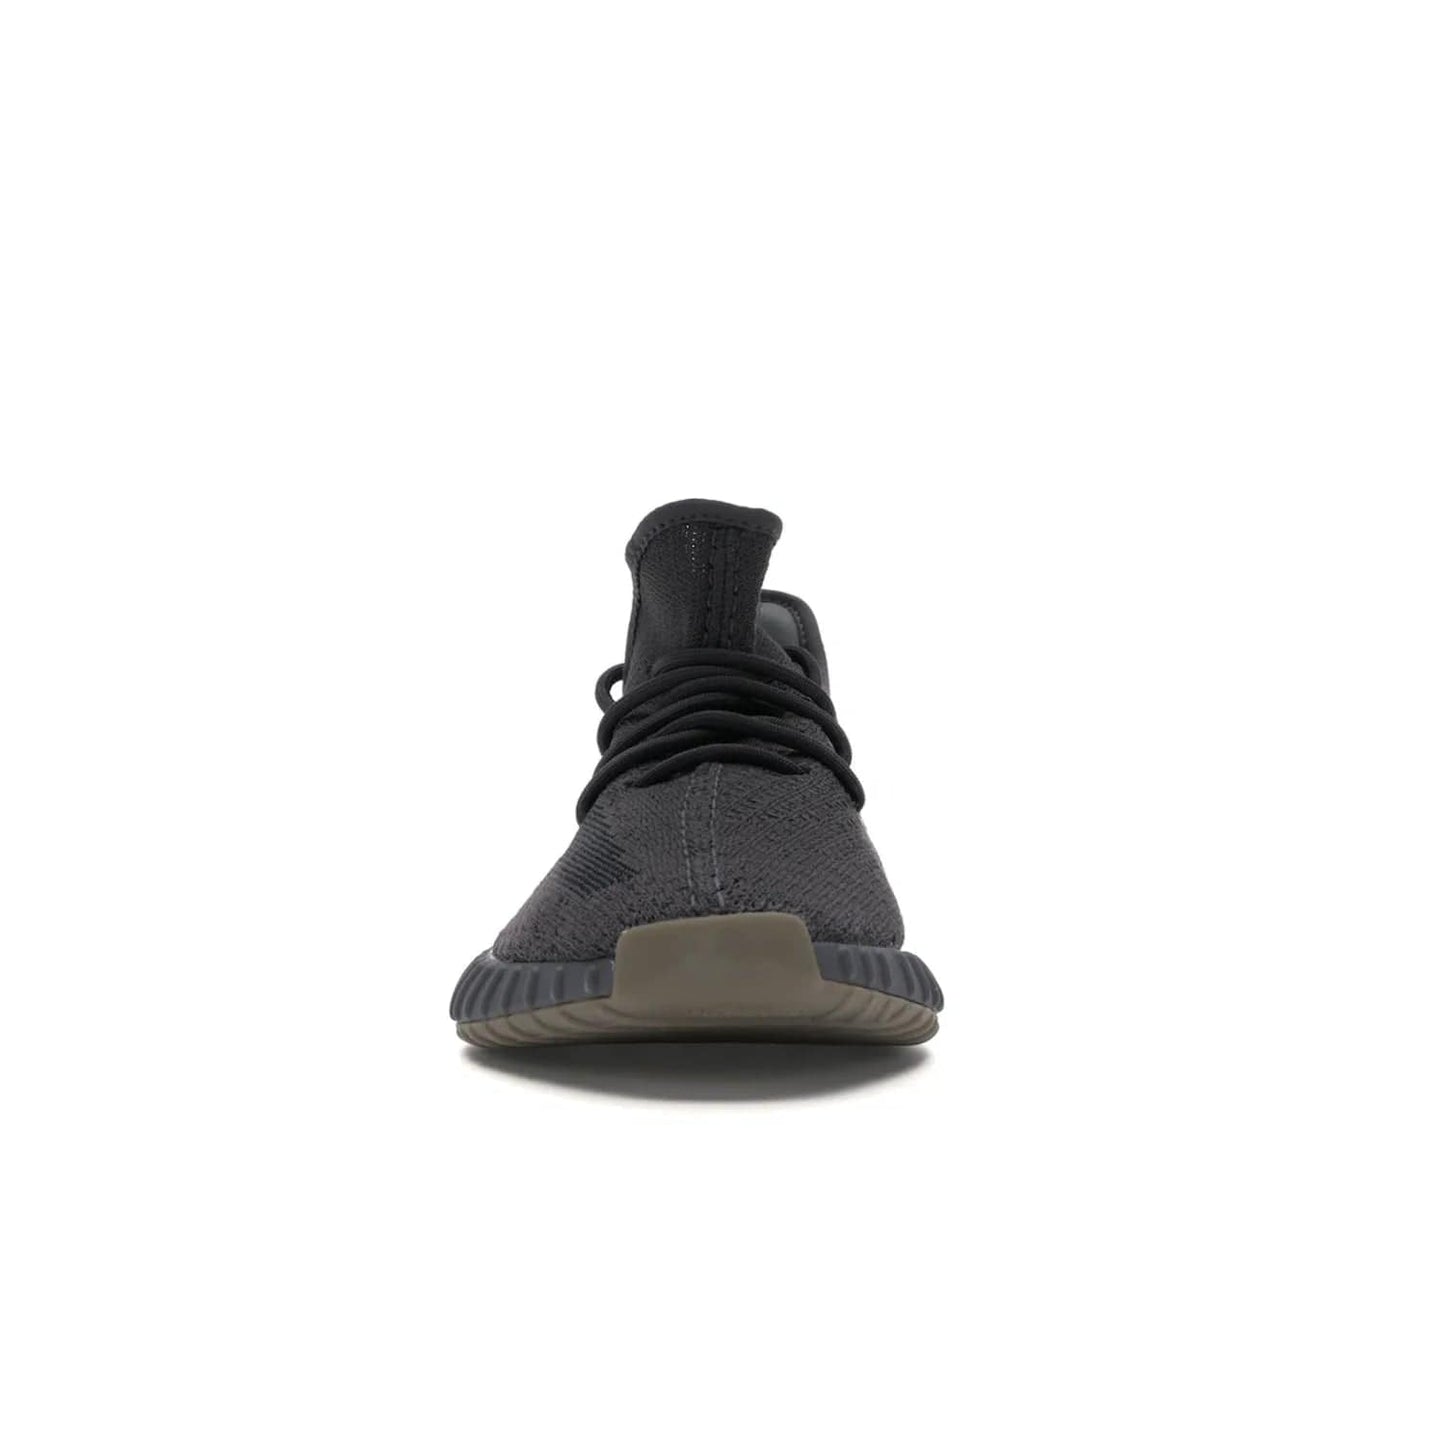 adidas Yeezy Boost 350 V2 Cinder - Image 10 - Only at www.BallersClubKickz.com - Shop for the stylish and eye catching adidas Yeezy 350 V2 Cinder in earth tones. Boost cushioned midsole and gold outsole add a touch of boldness. A timeless addition to any wardrobe.